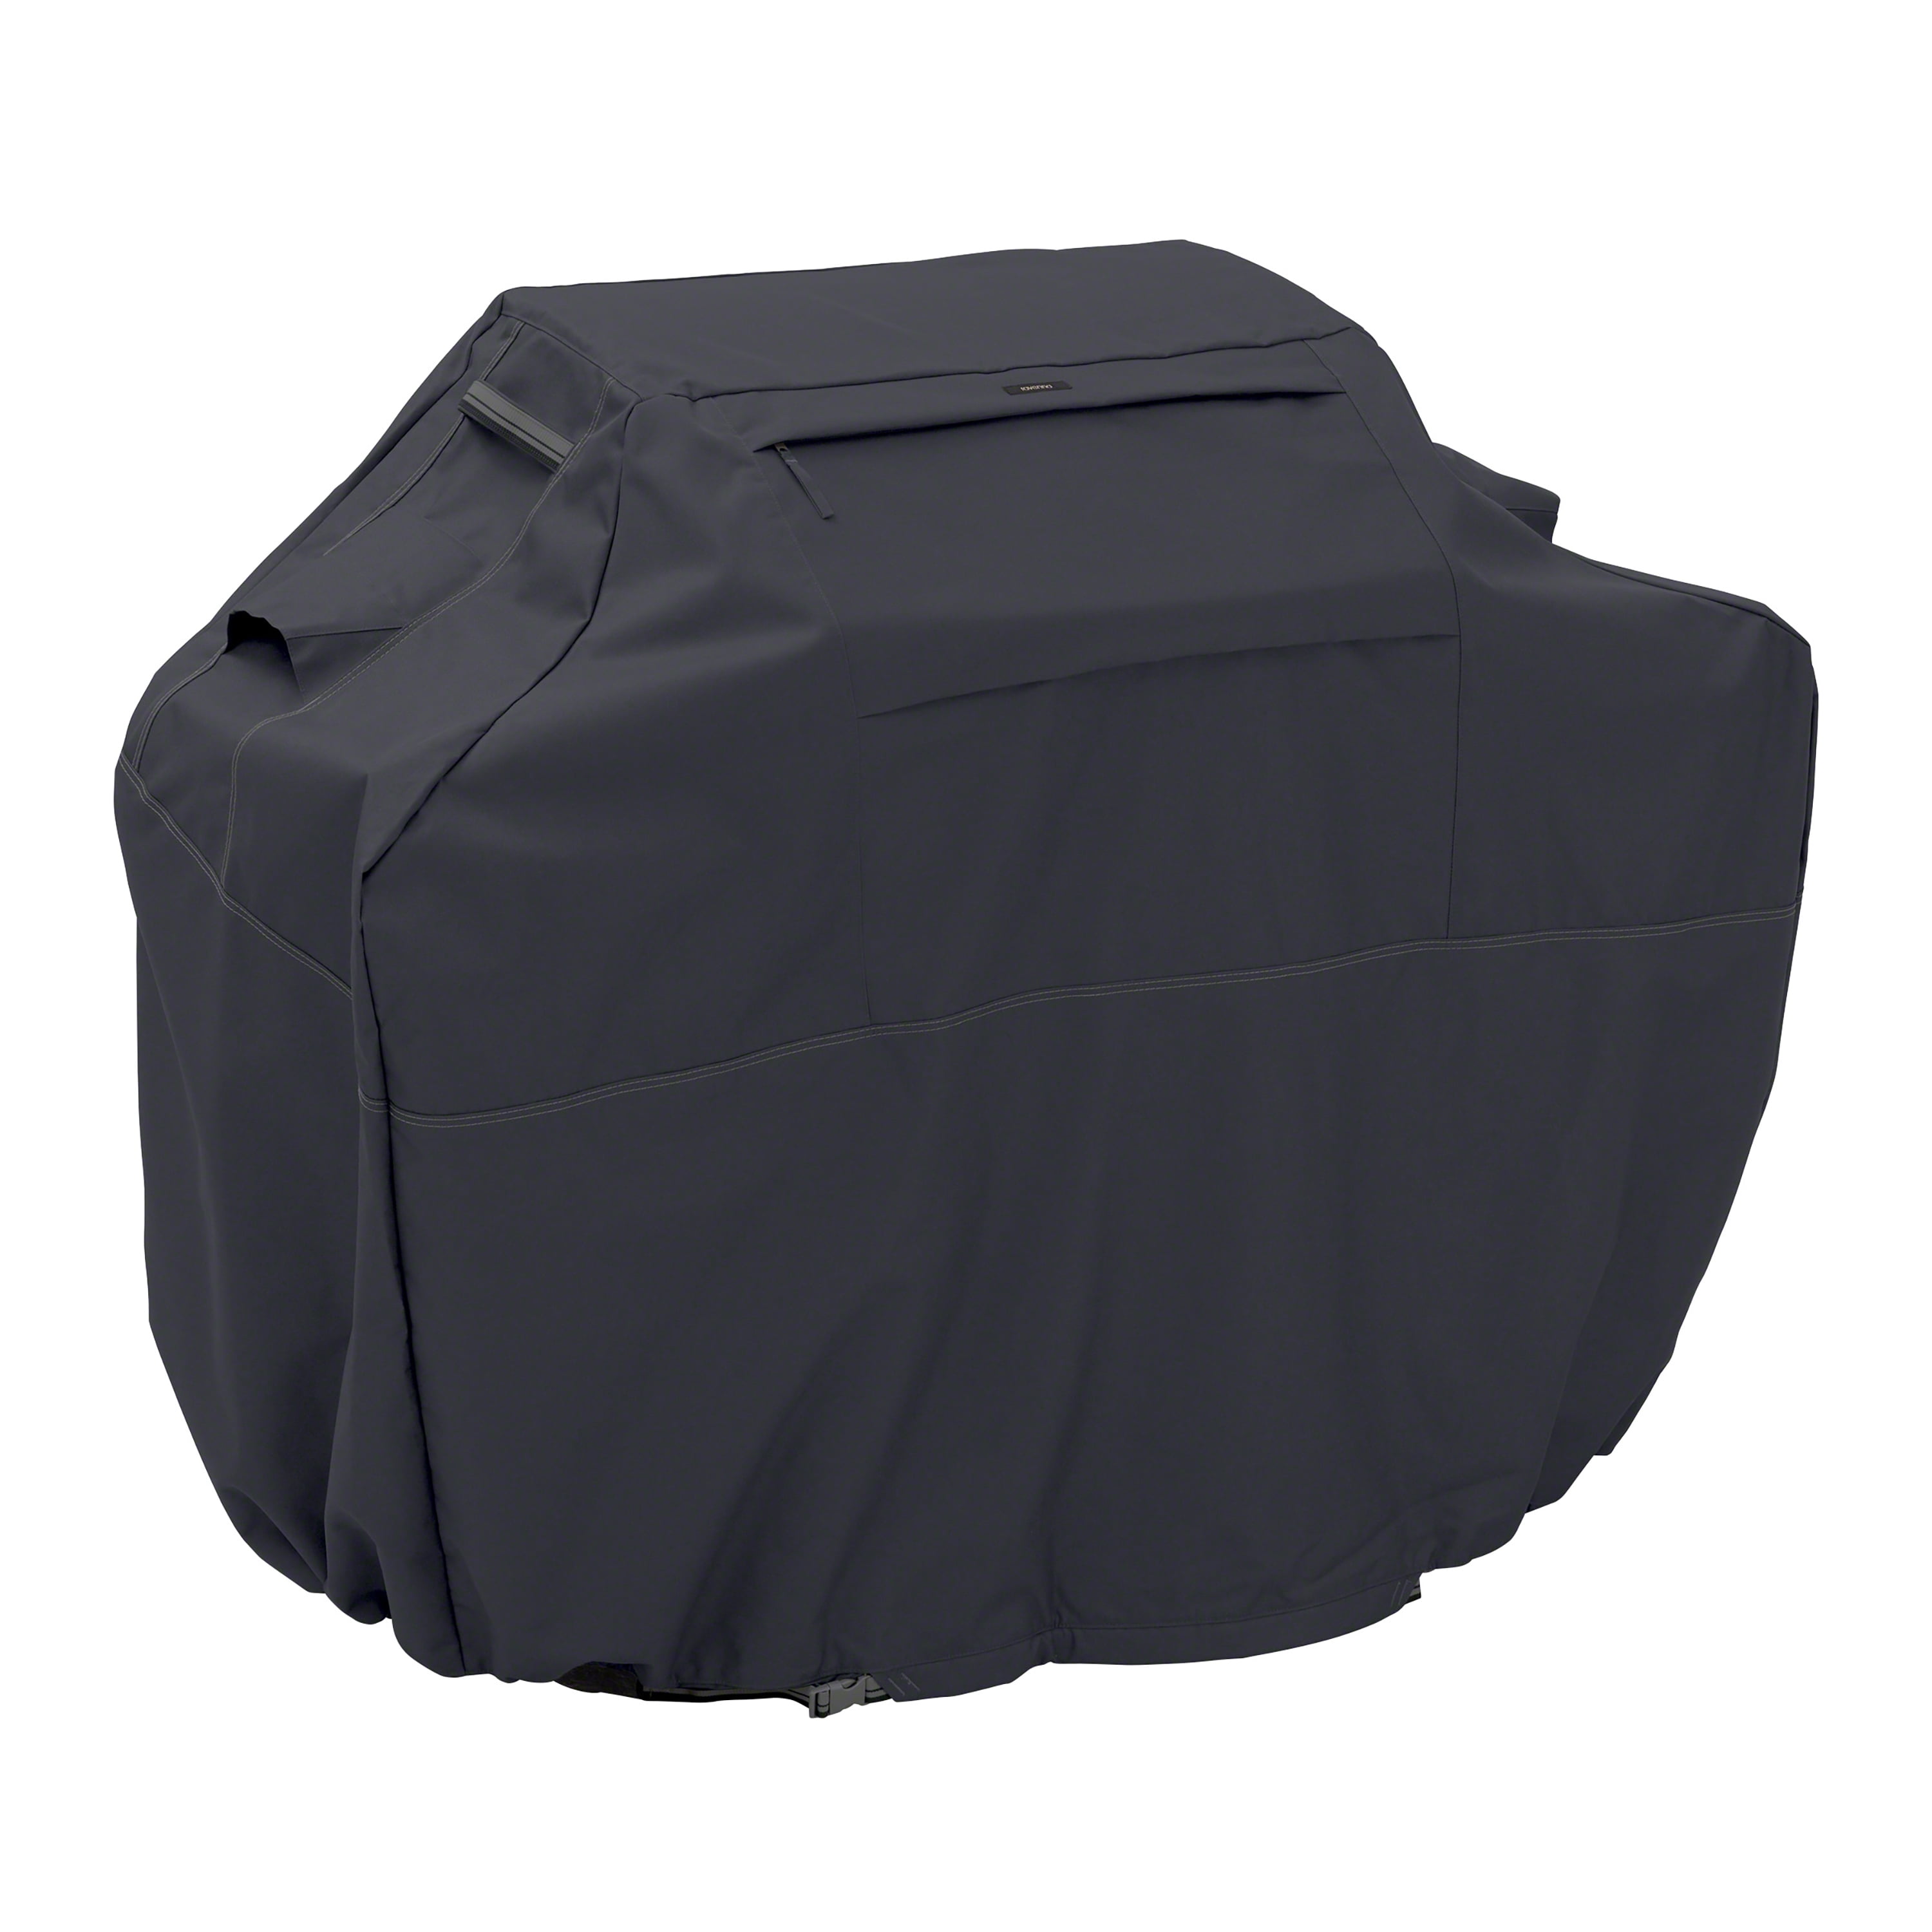 Grill Cover Accessory 64 Inch Large Tan BBQ Gas Broil Full Patio Water-Resistant 